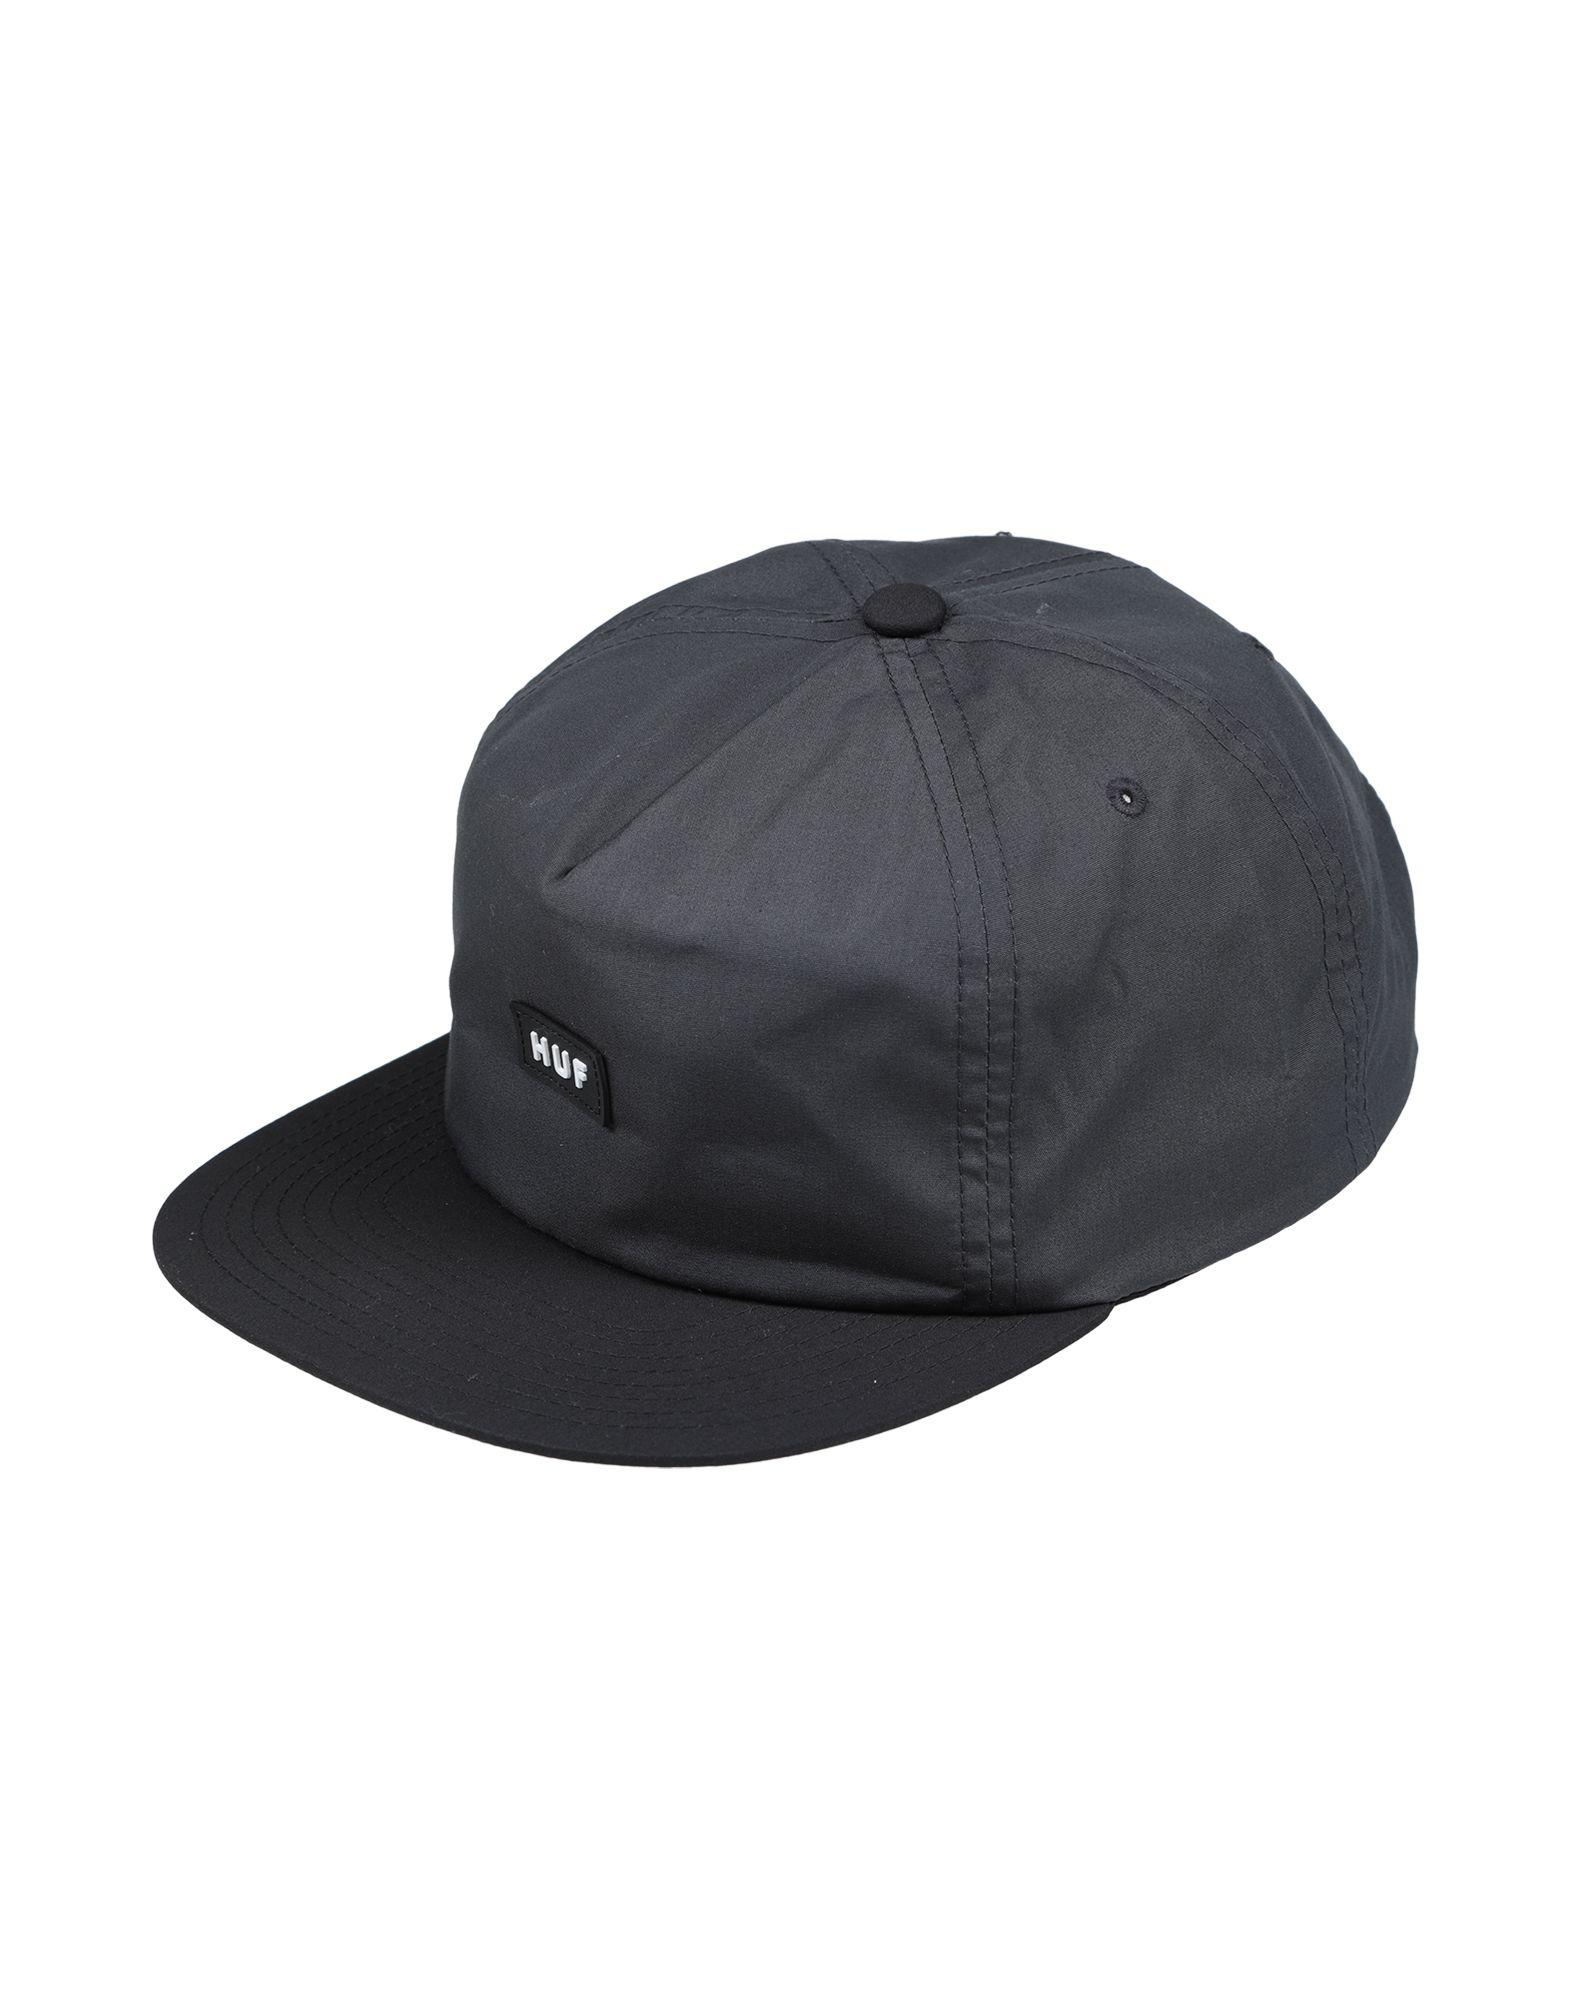 Huf Synthetic Hat in Steel Grey (Gray) for Men - Lyst